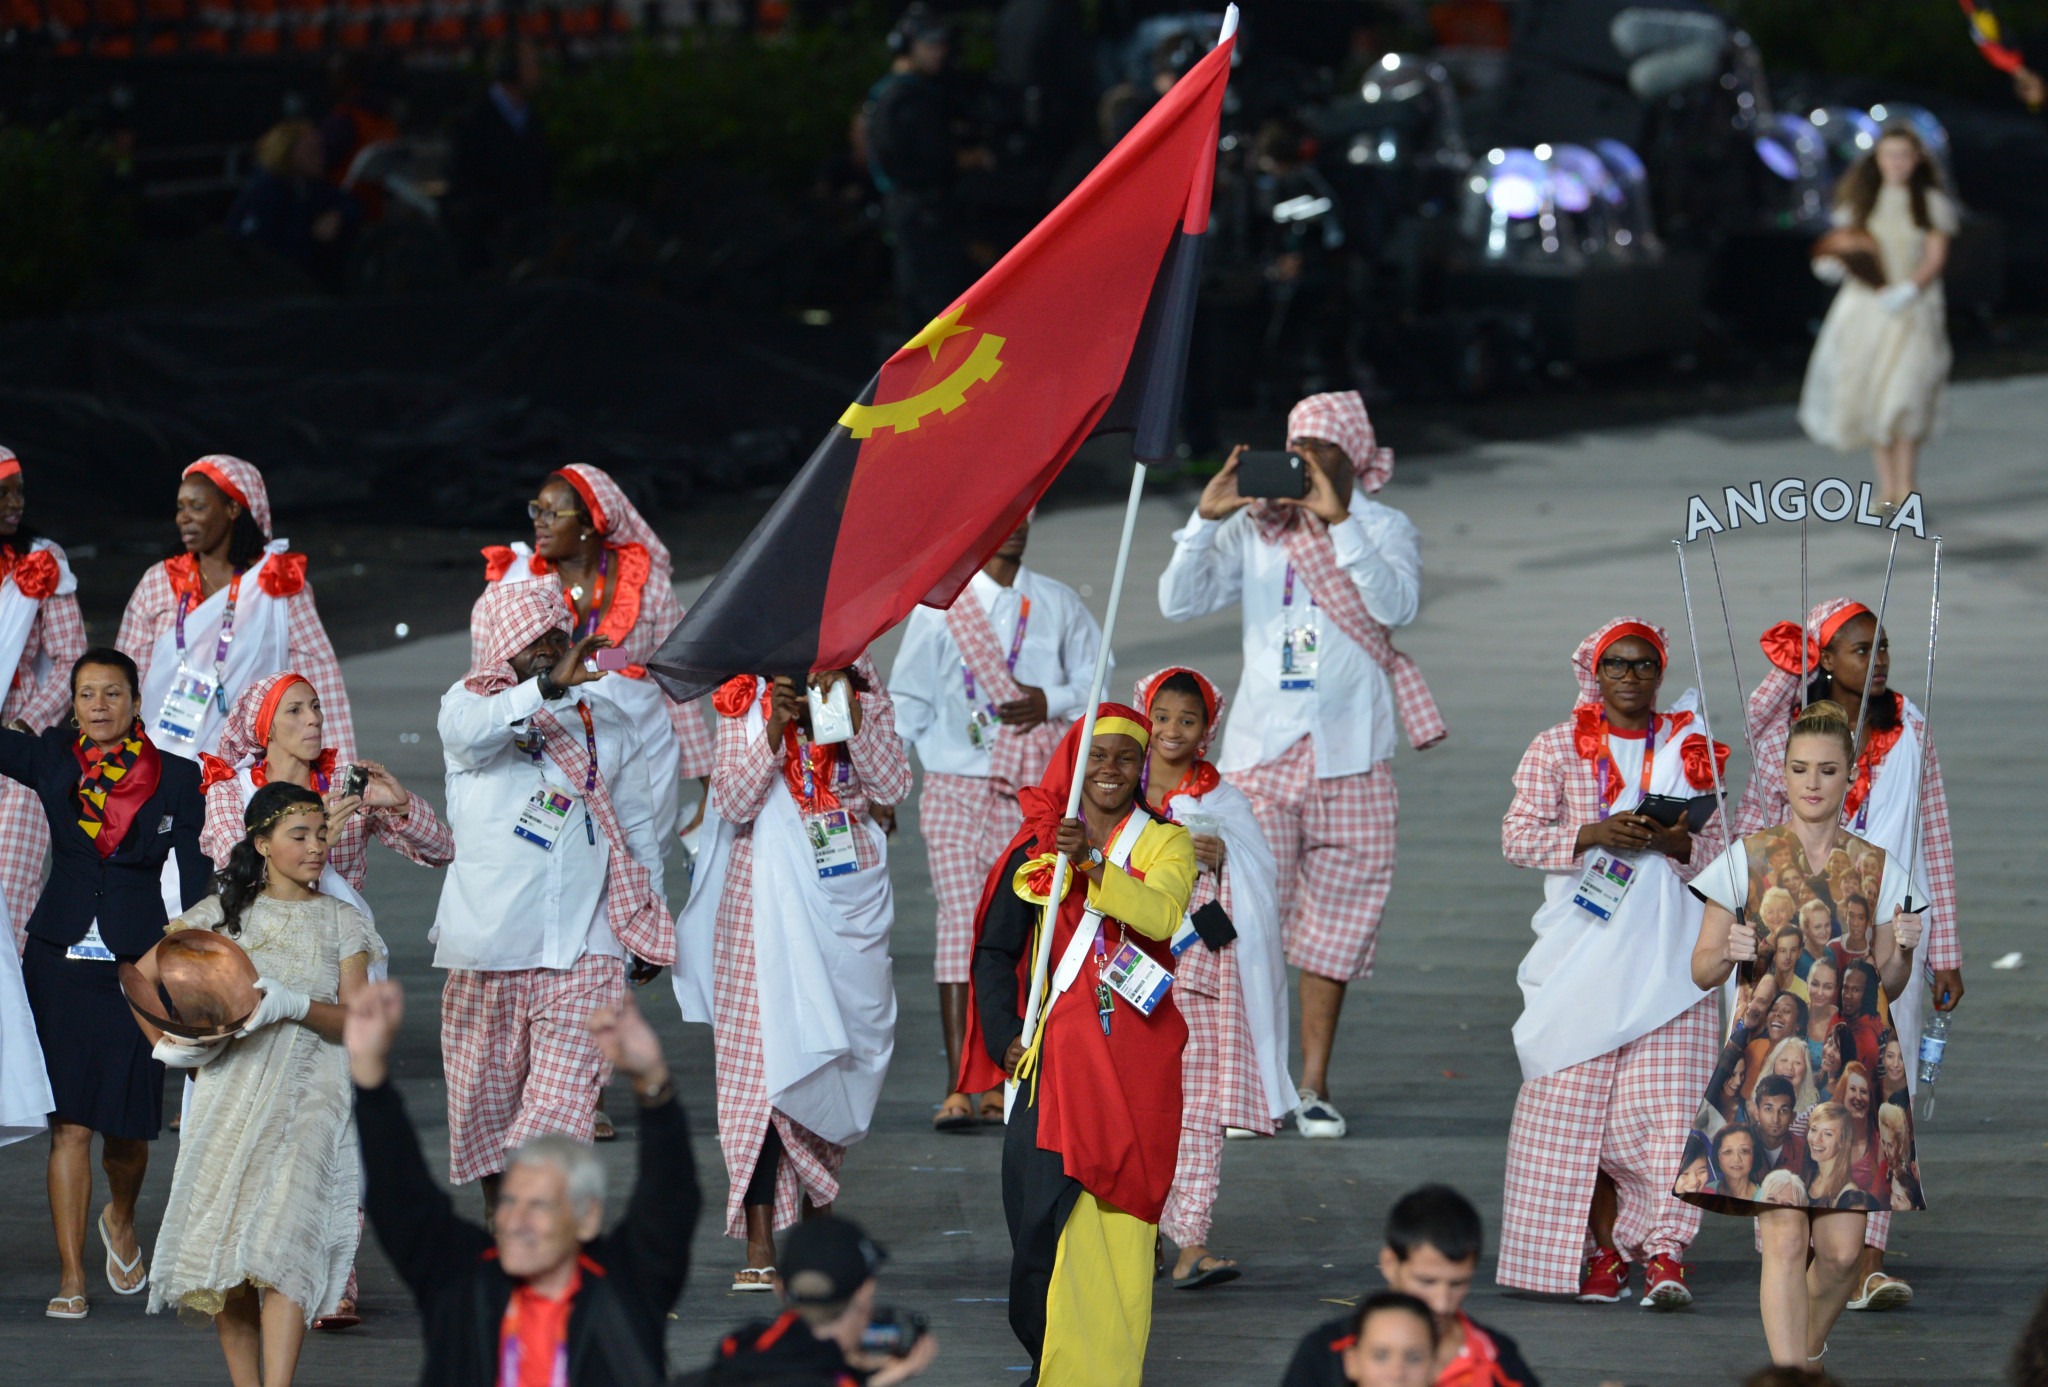 The Angolan Olympic Committee has approved its activities plan and budget for 2019 ©Getty Images